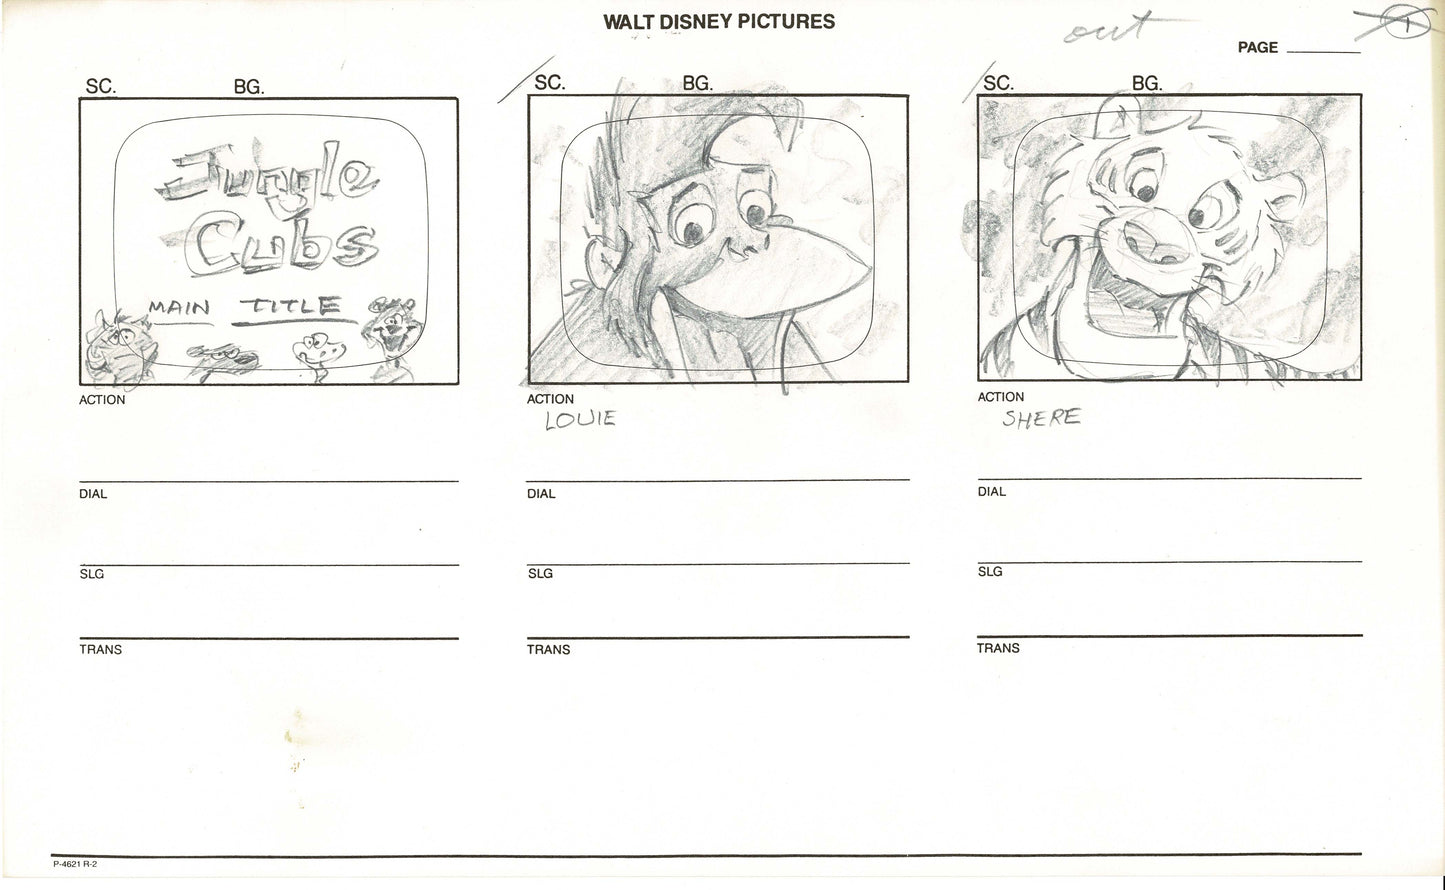 JUNGLE CUBS Disney Production Animation Storboard Drawing from Animators Estate 1996-8 1